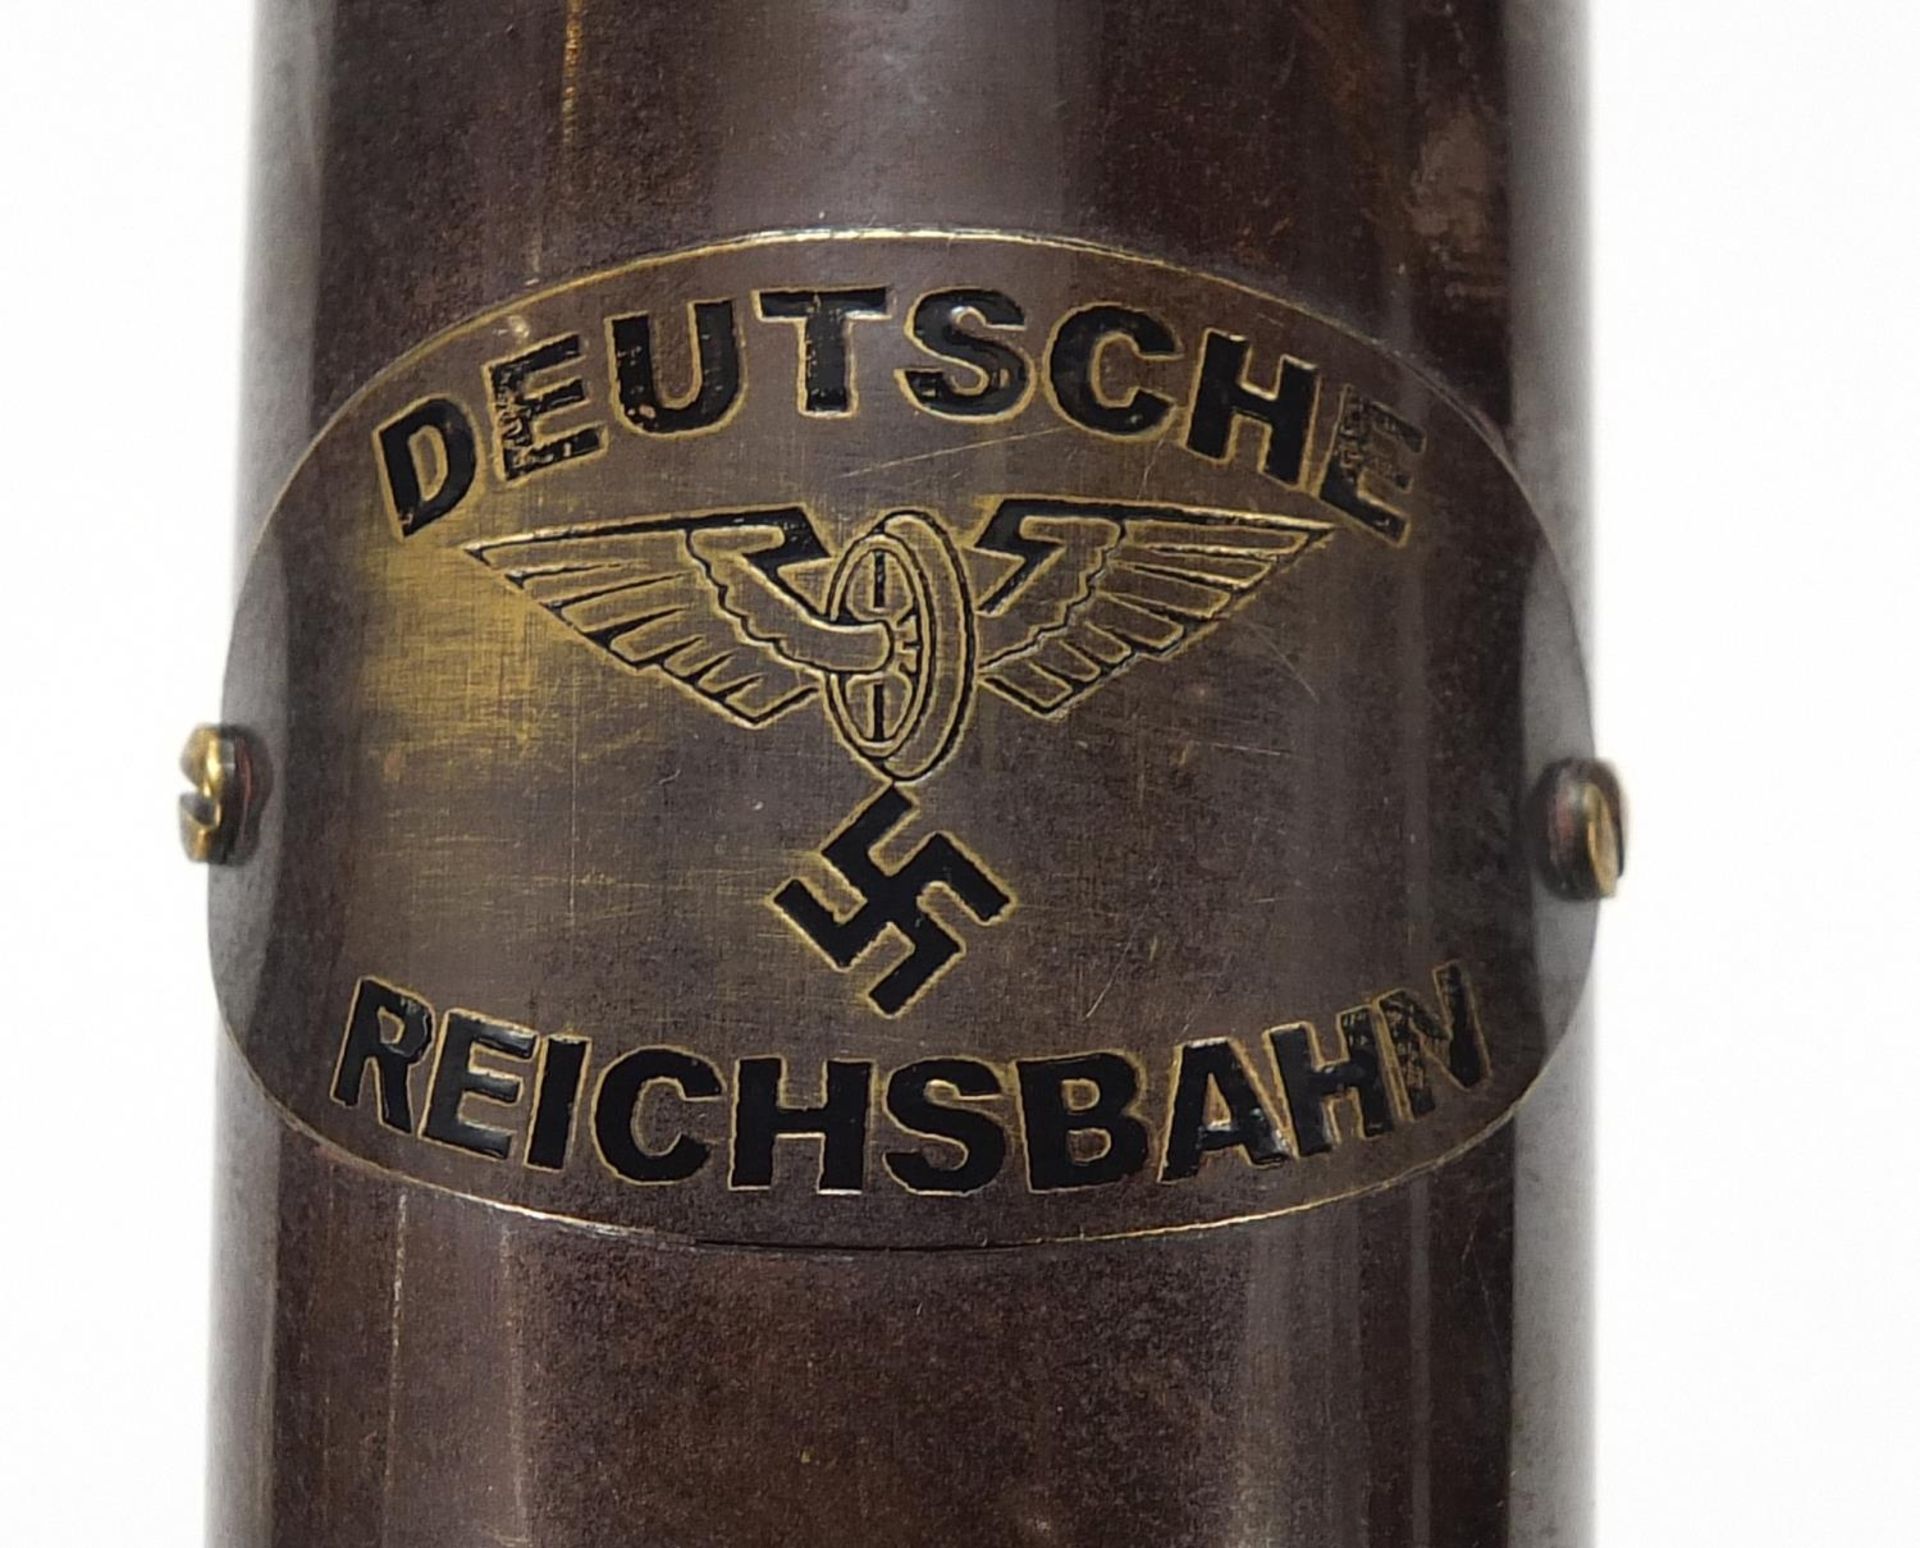 German military interest three draw brass telescope, 15cm in length when closed - Image 2 of 5